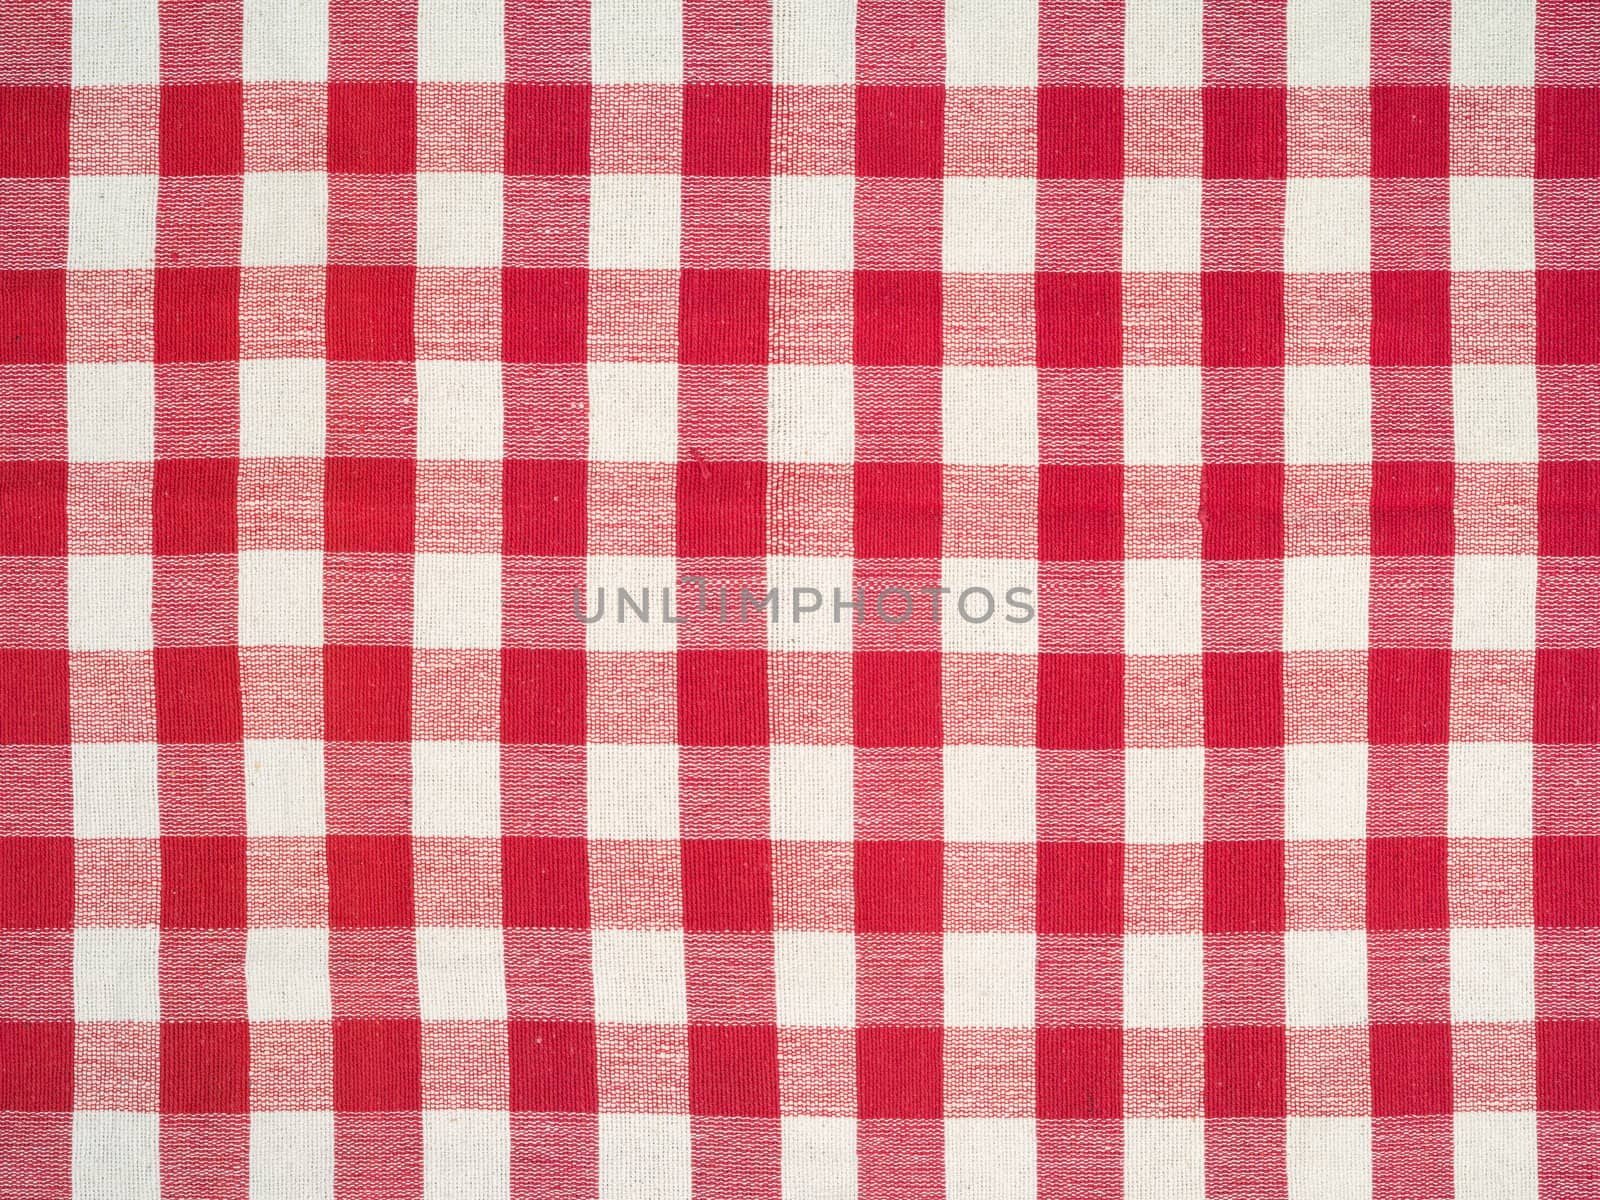 Italian tablecloth by sumners